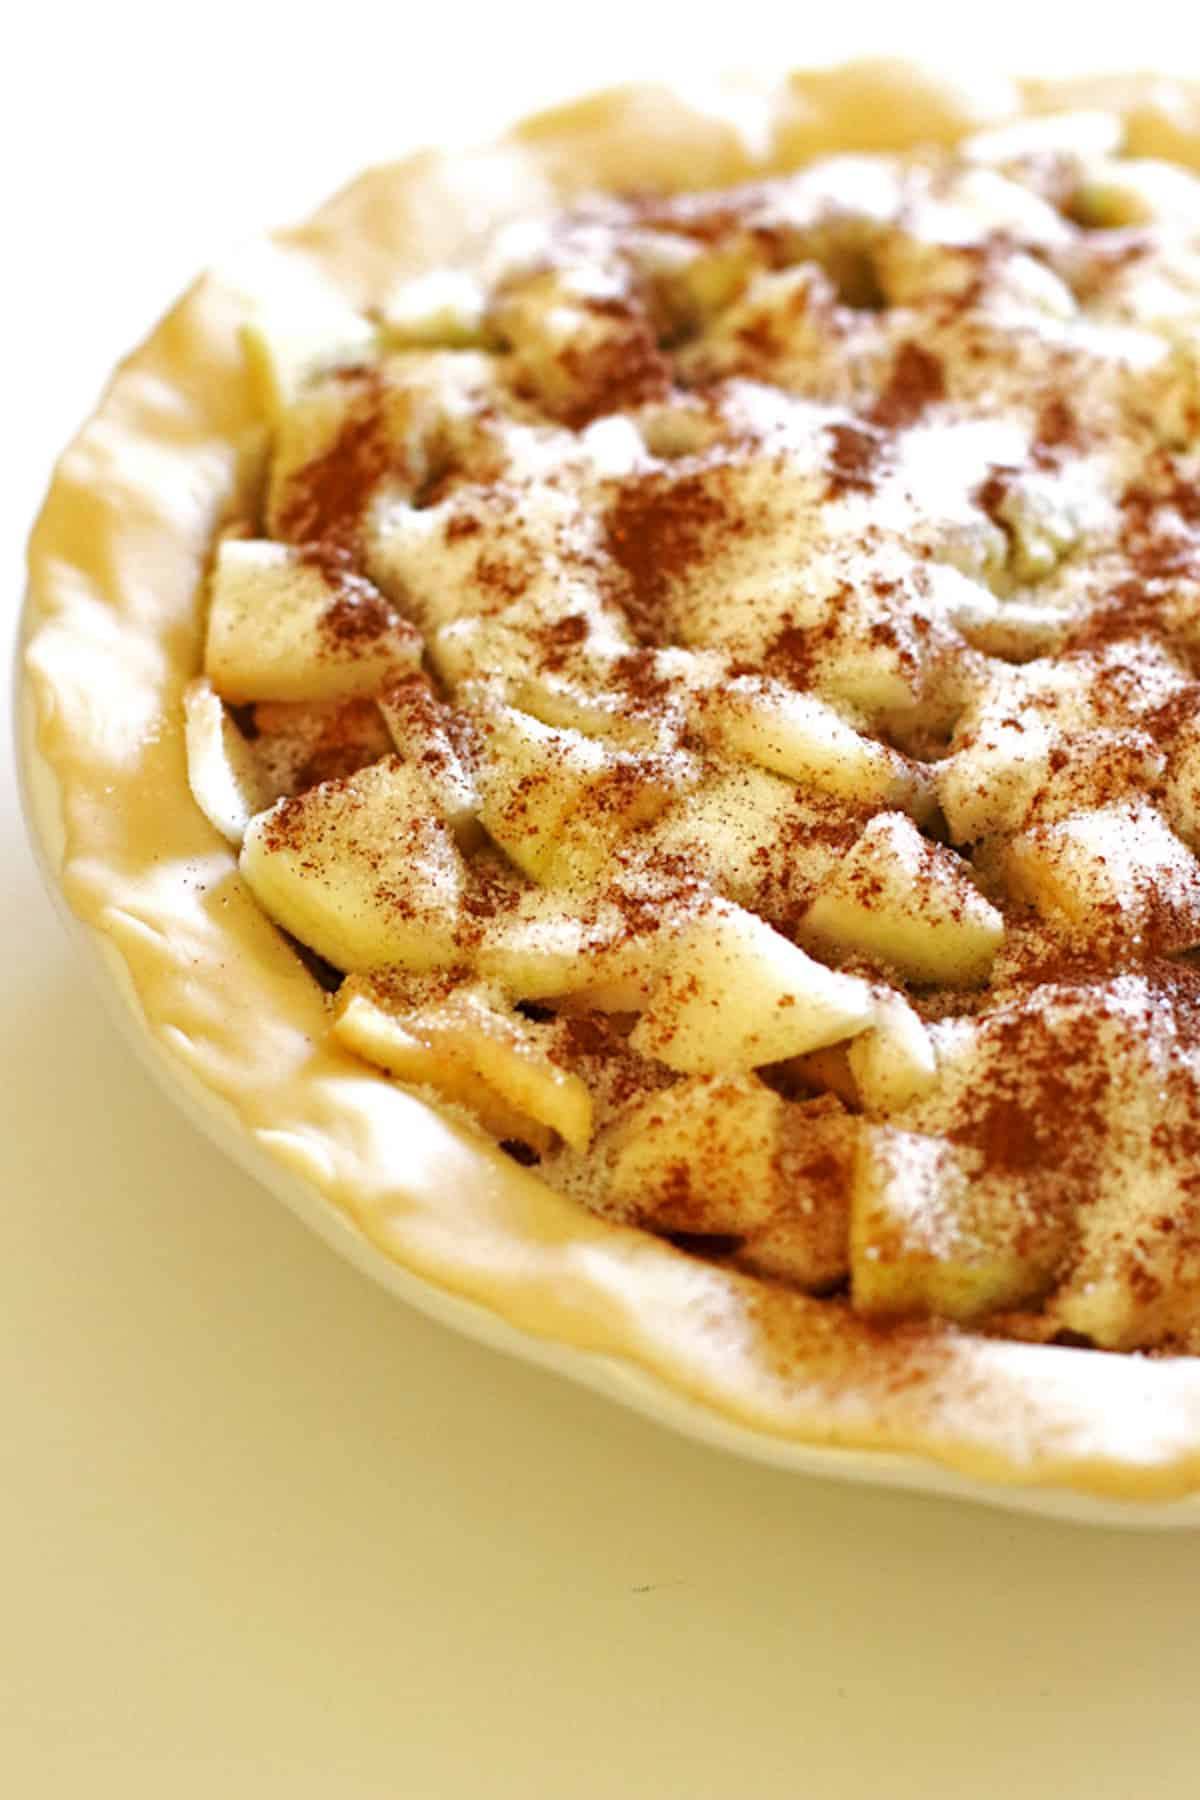 Sliced apples in pie crust with sugar and spices sprinkled over them